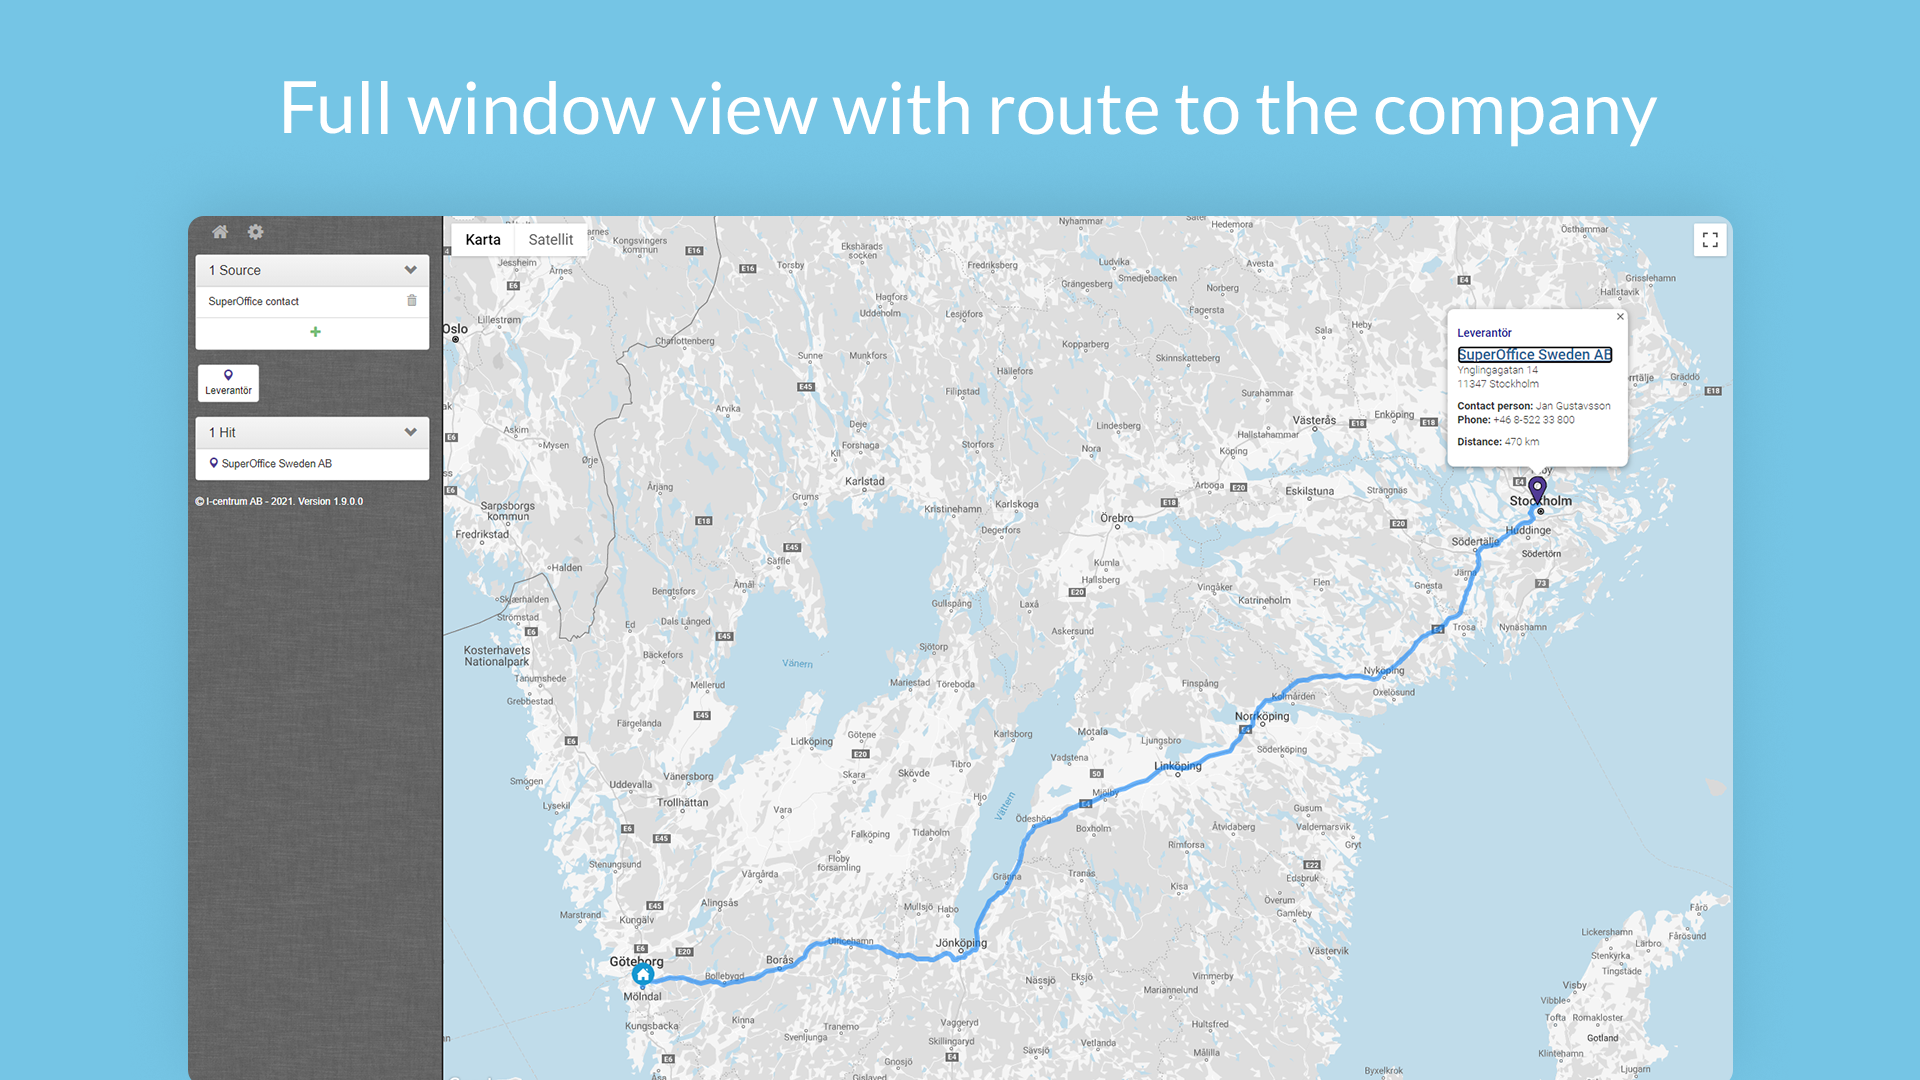 Map4you - full window view with route to the company.png